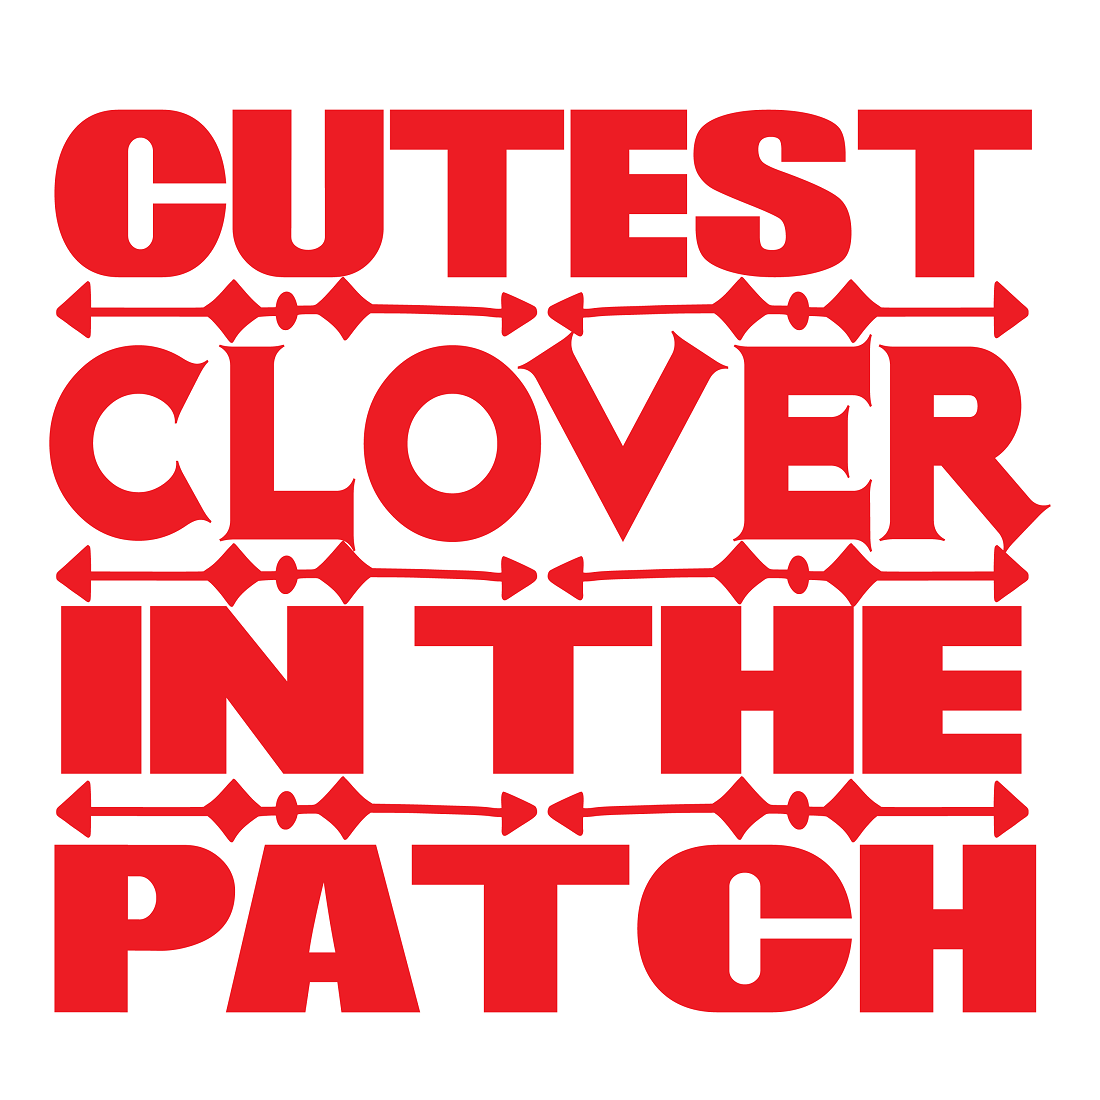 cutest clover in the patch preview image.